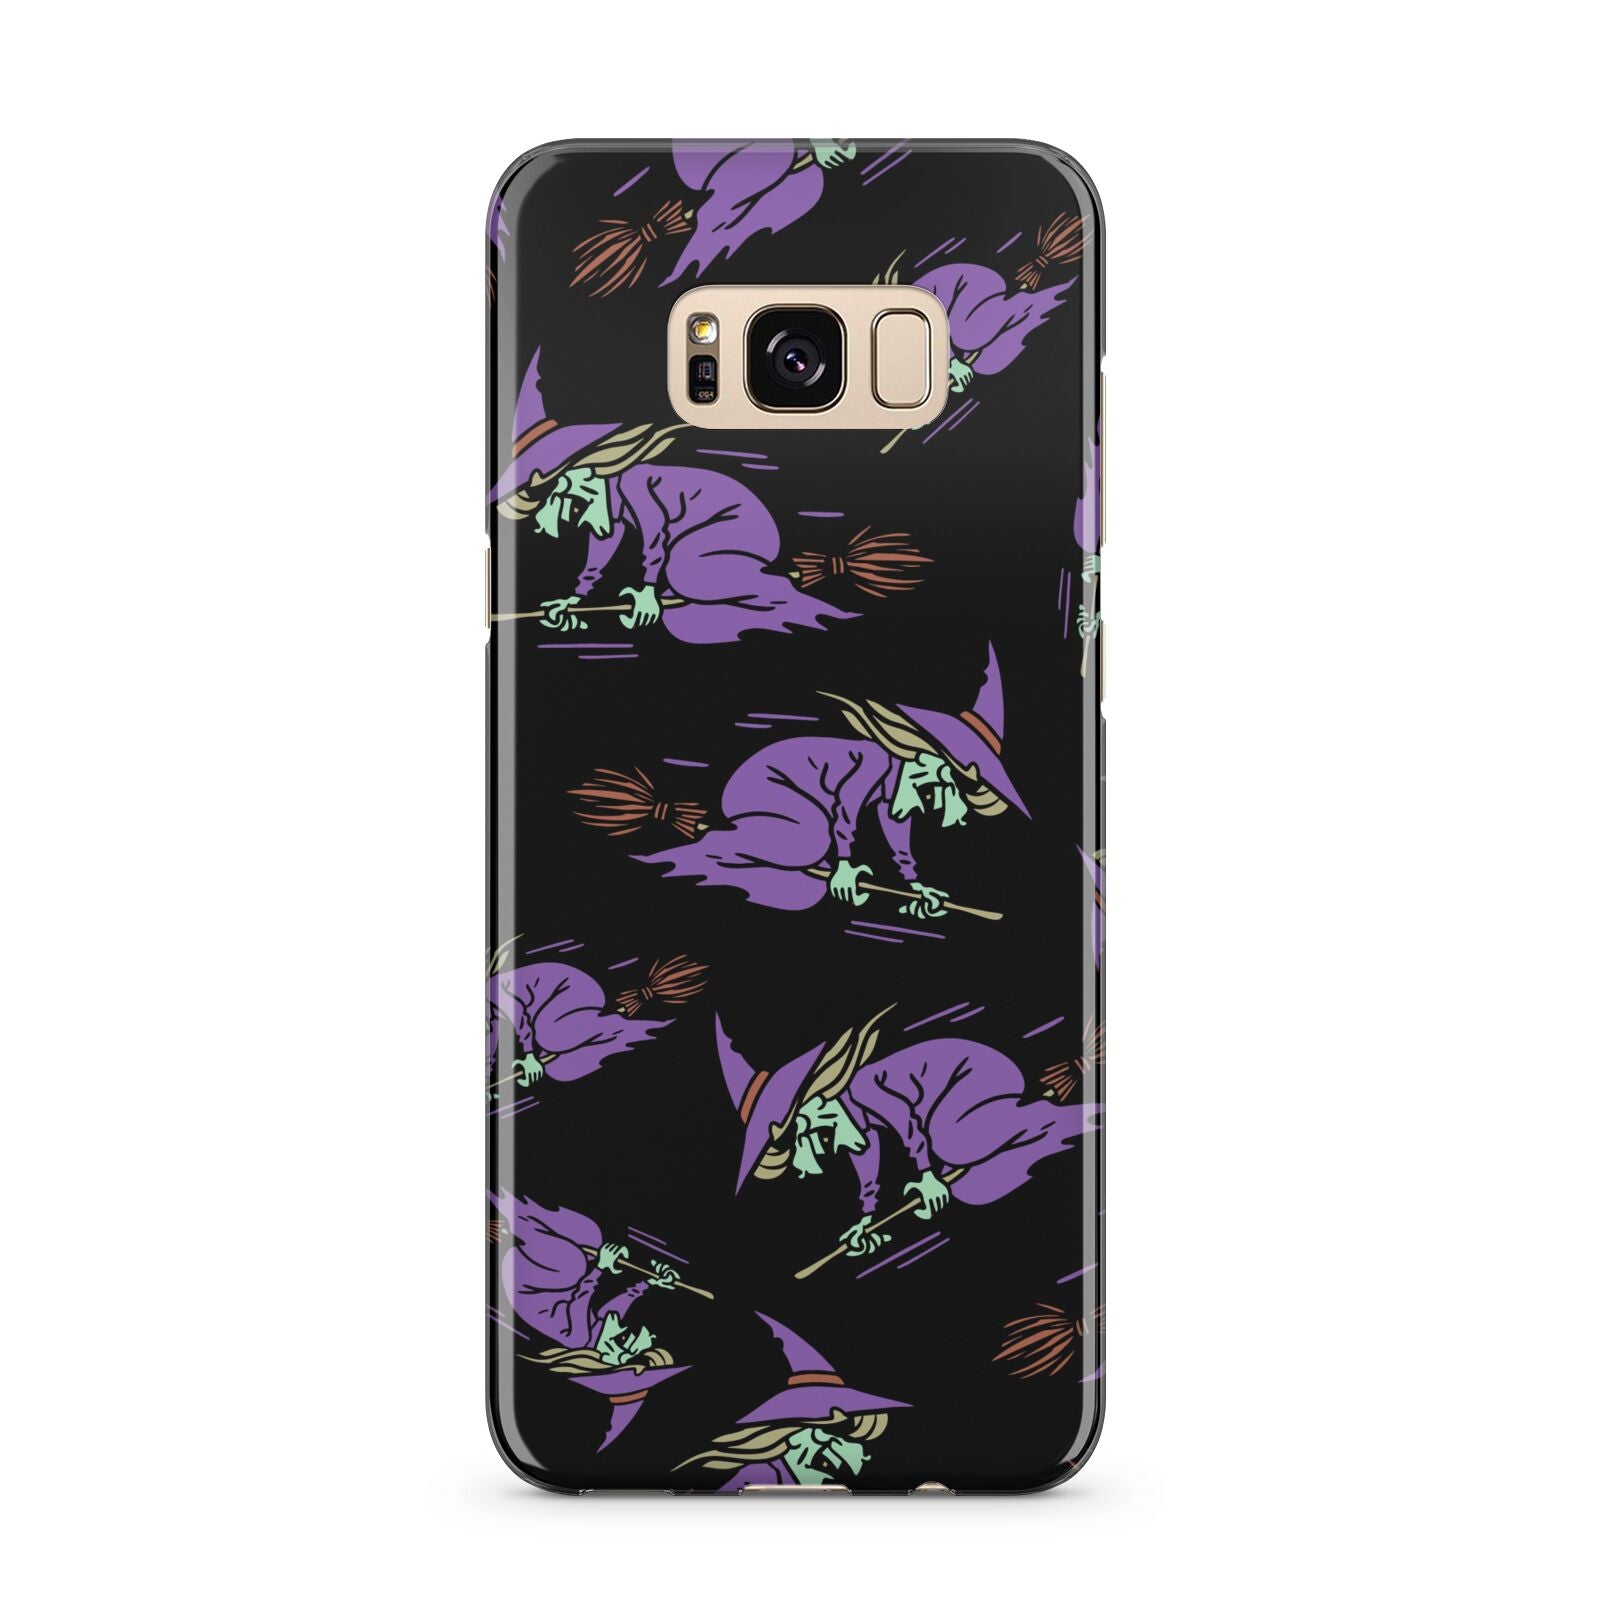 Flying Witches Samsung Galaxy S8 Plus Case